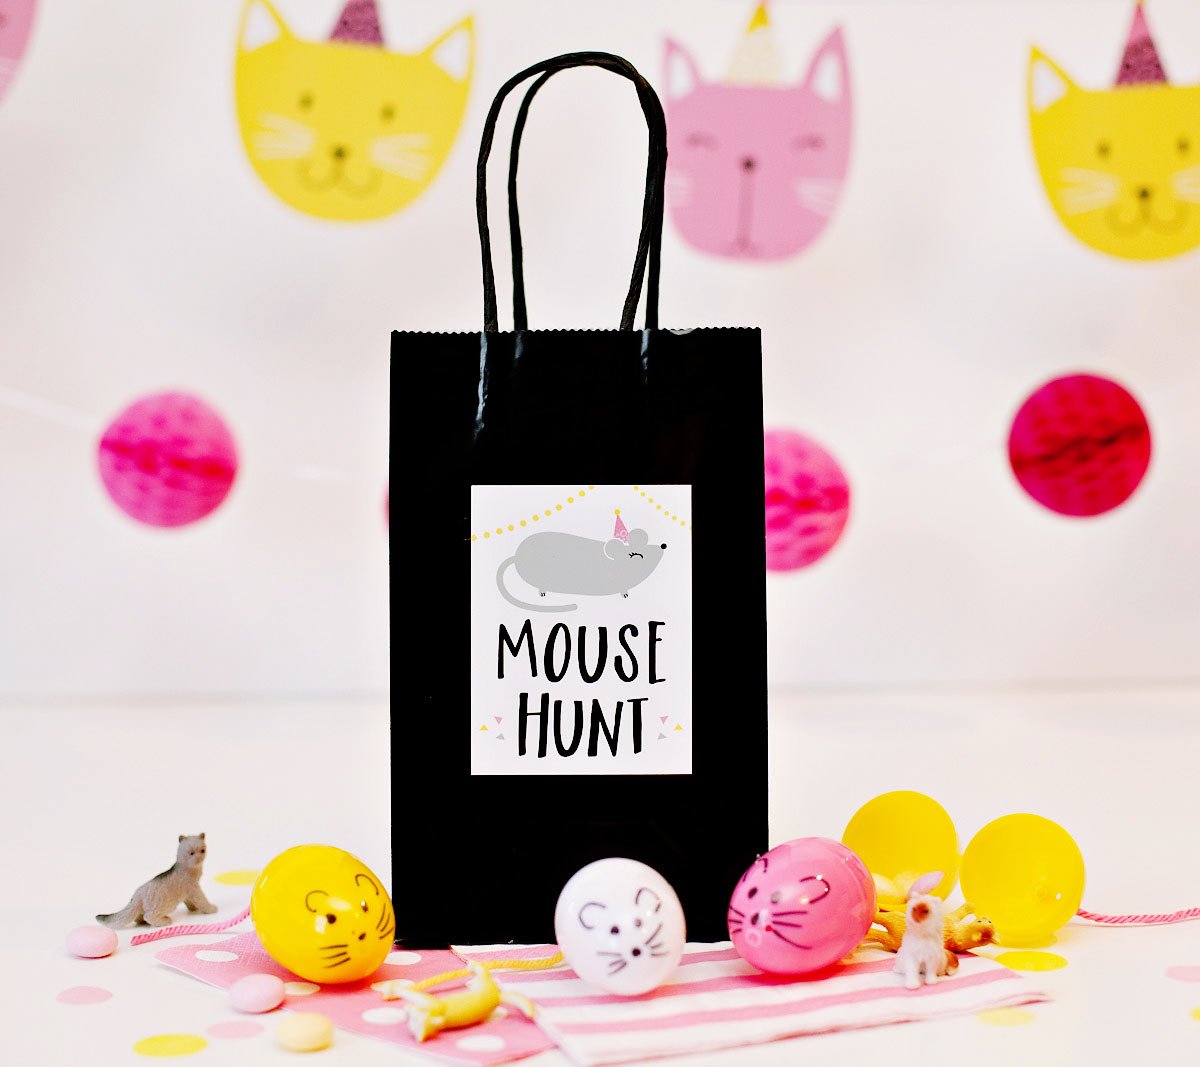 mouse hunt party activity for kids birthday